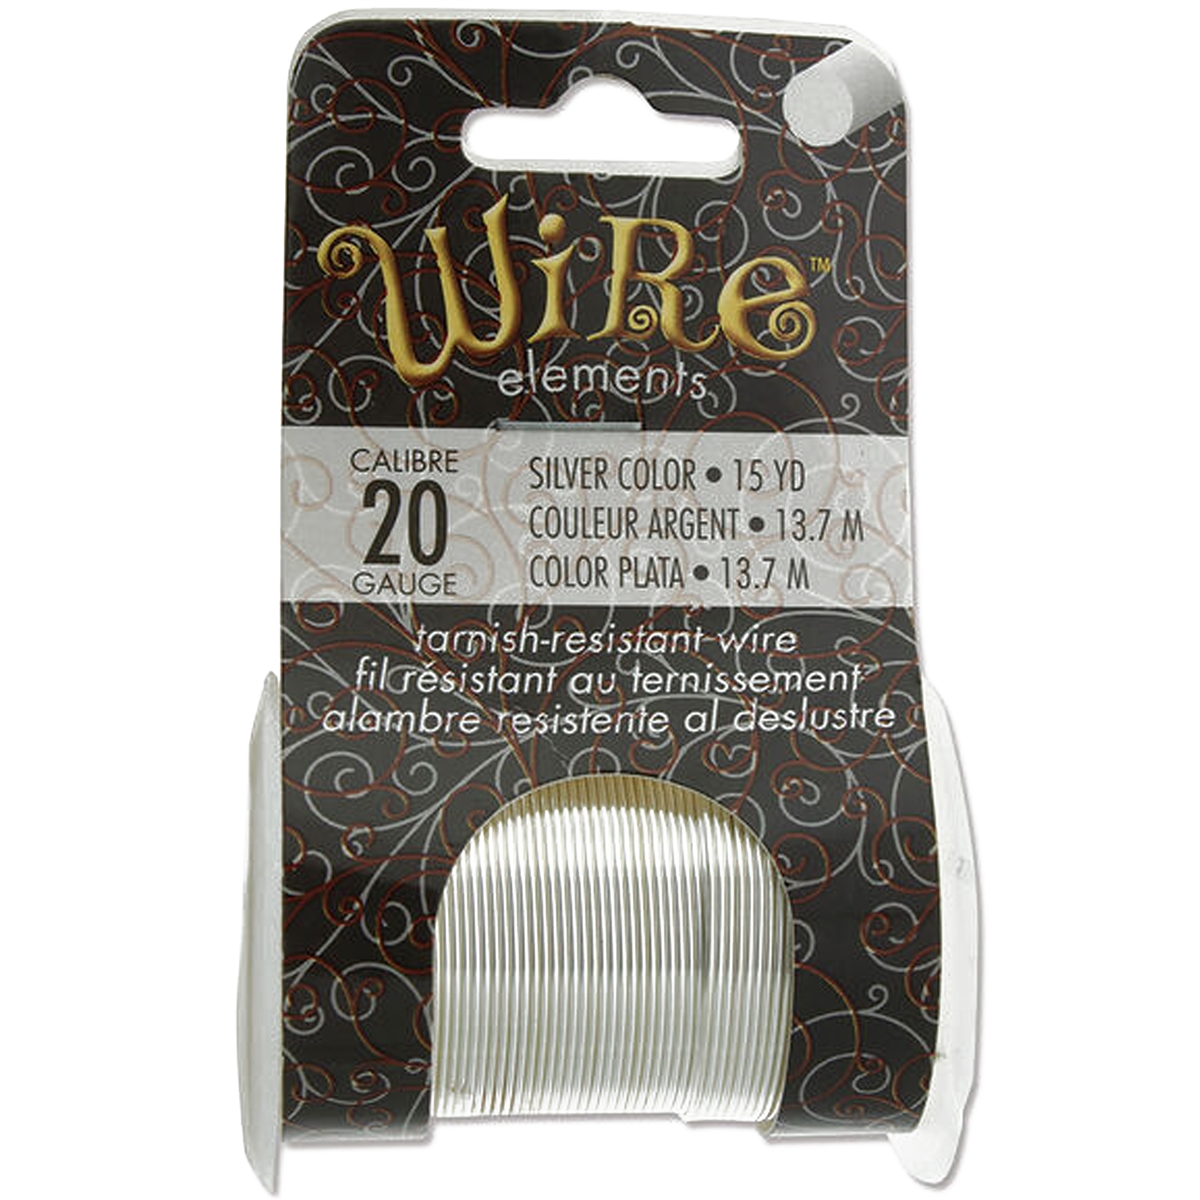 gold wire, jewelry wire, bead smith, 20 gauge, gold, wire, wire elements,  tarnish resistant, 6 yards